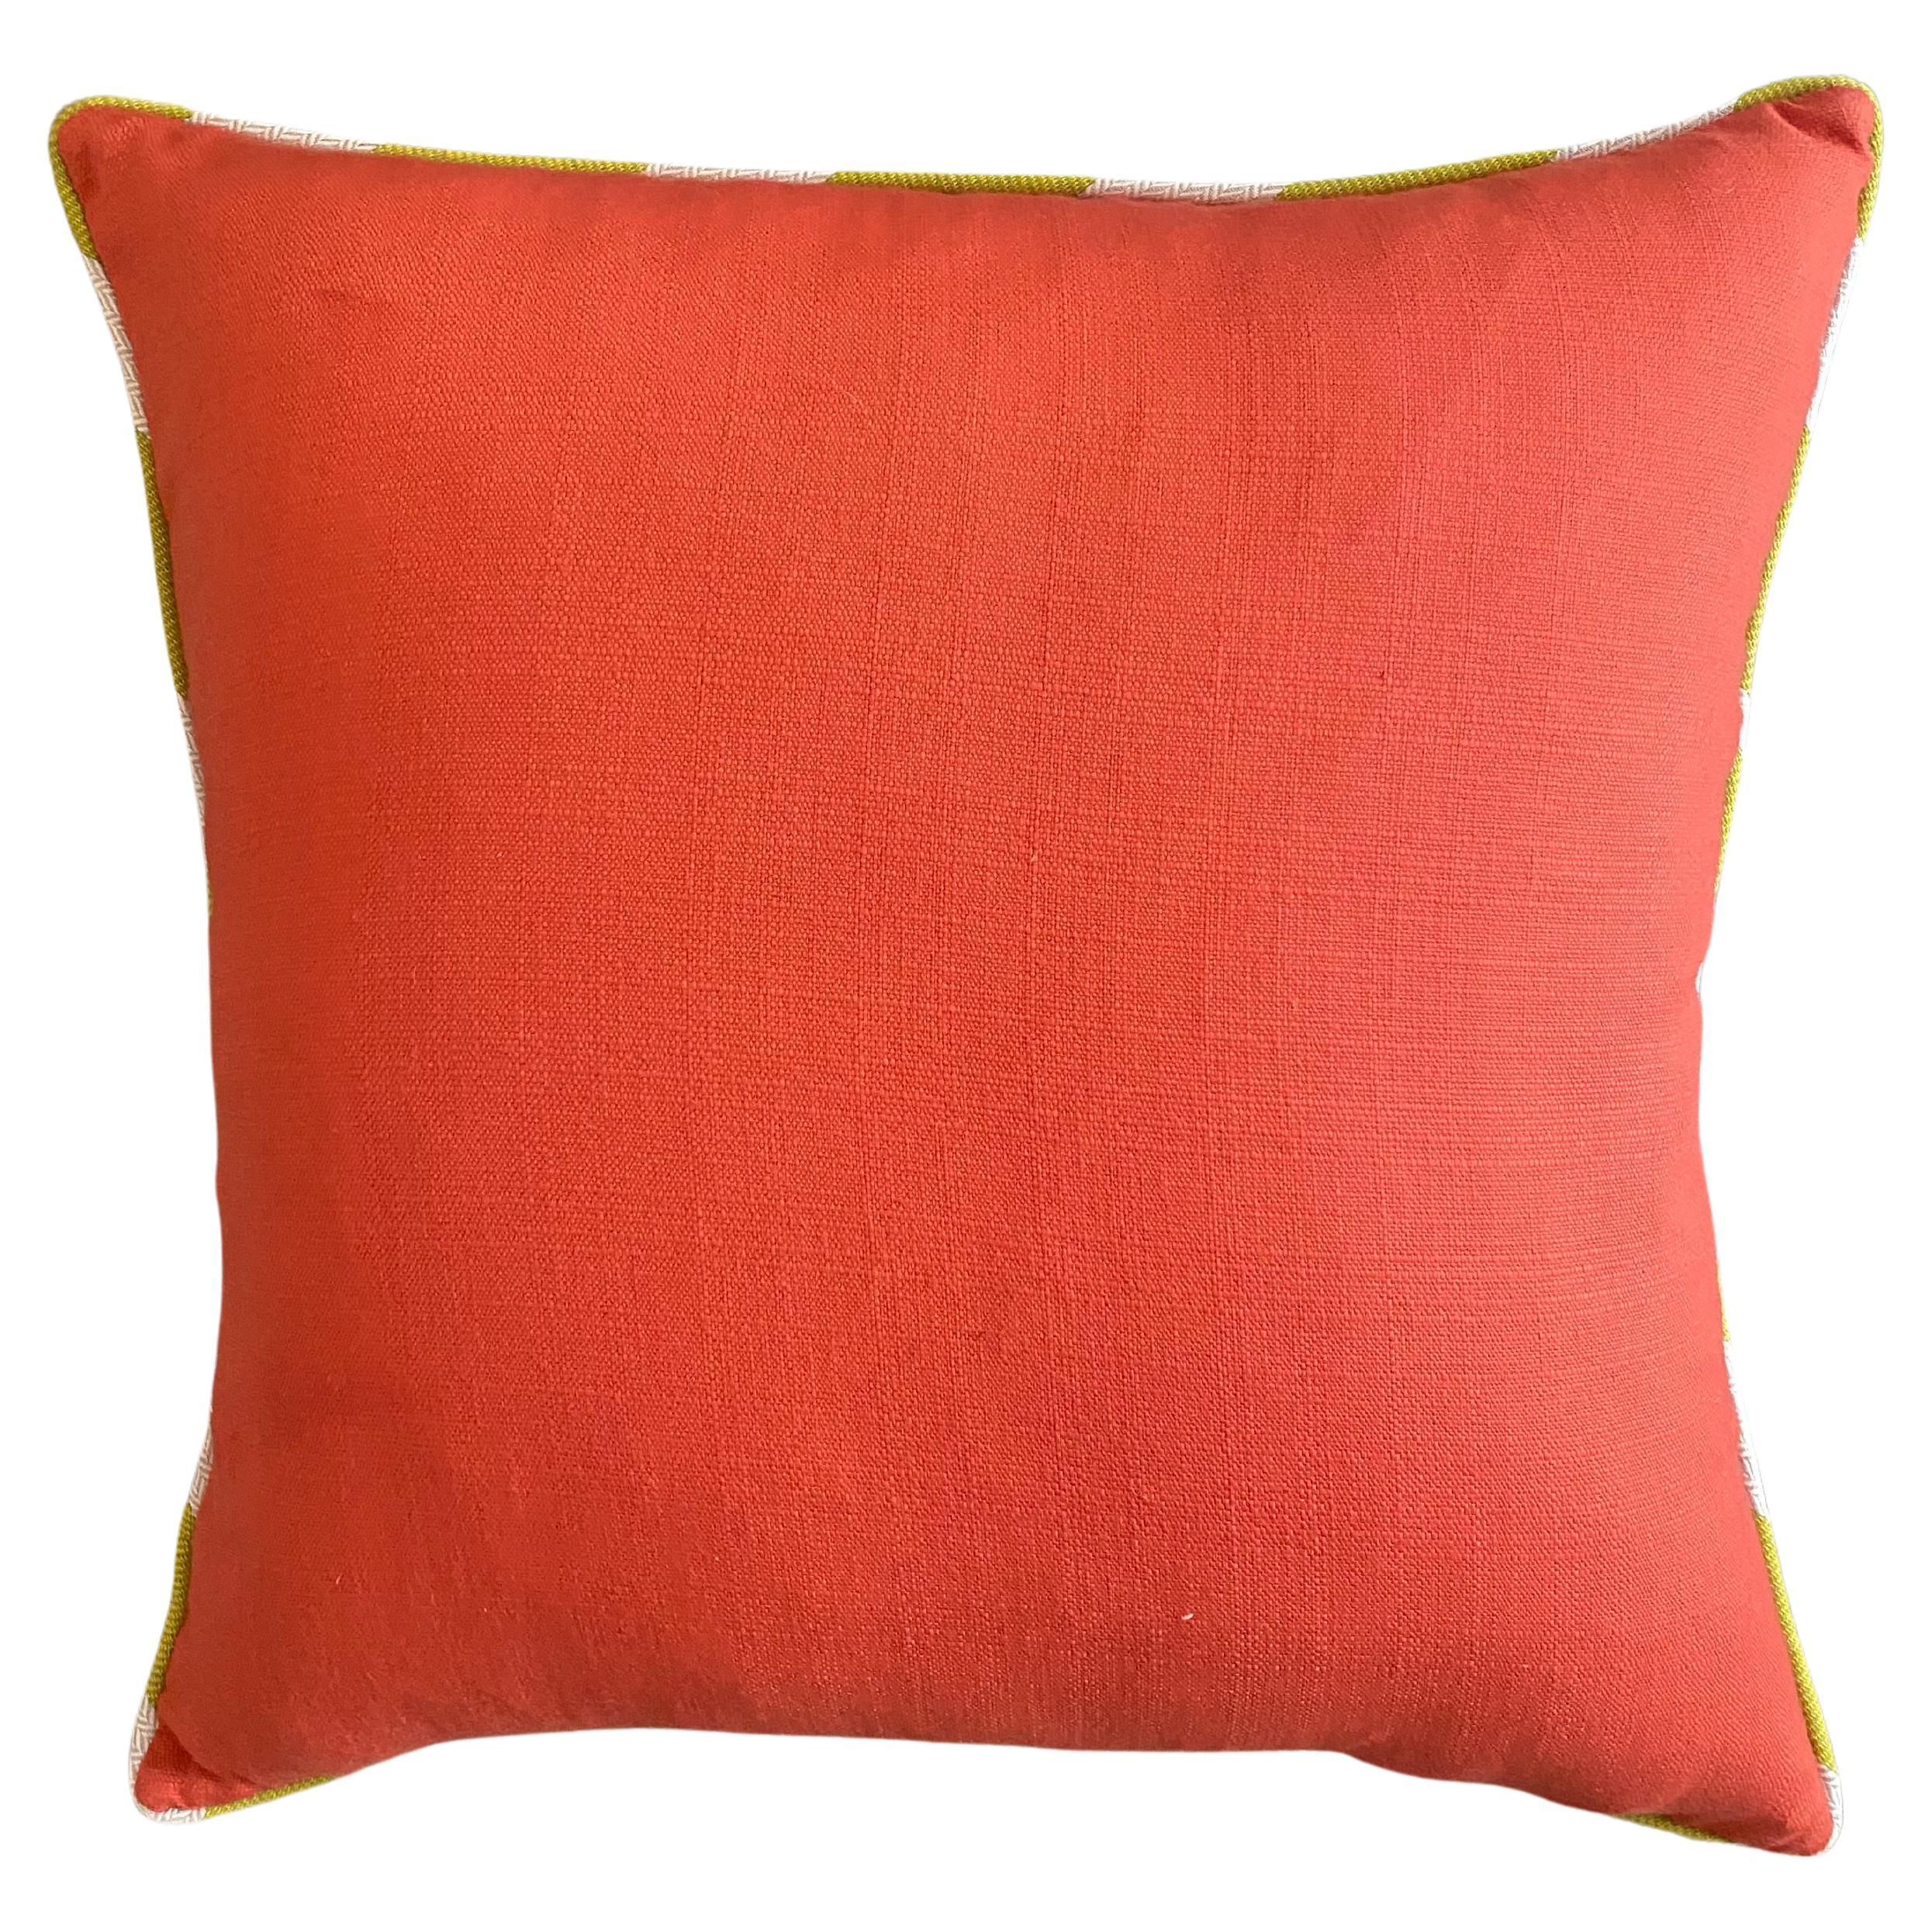 Orange / Tangerine Heavy Cotton Pillow with Celadon and White Welt In New Condition For Sale In Englewood, CO